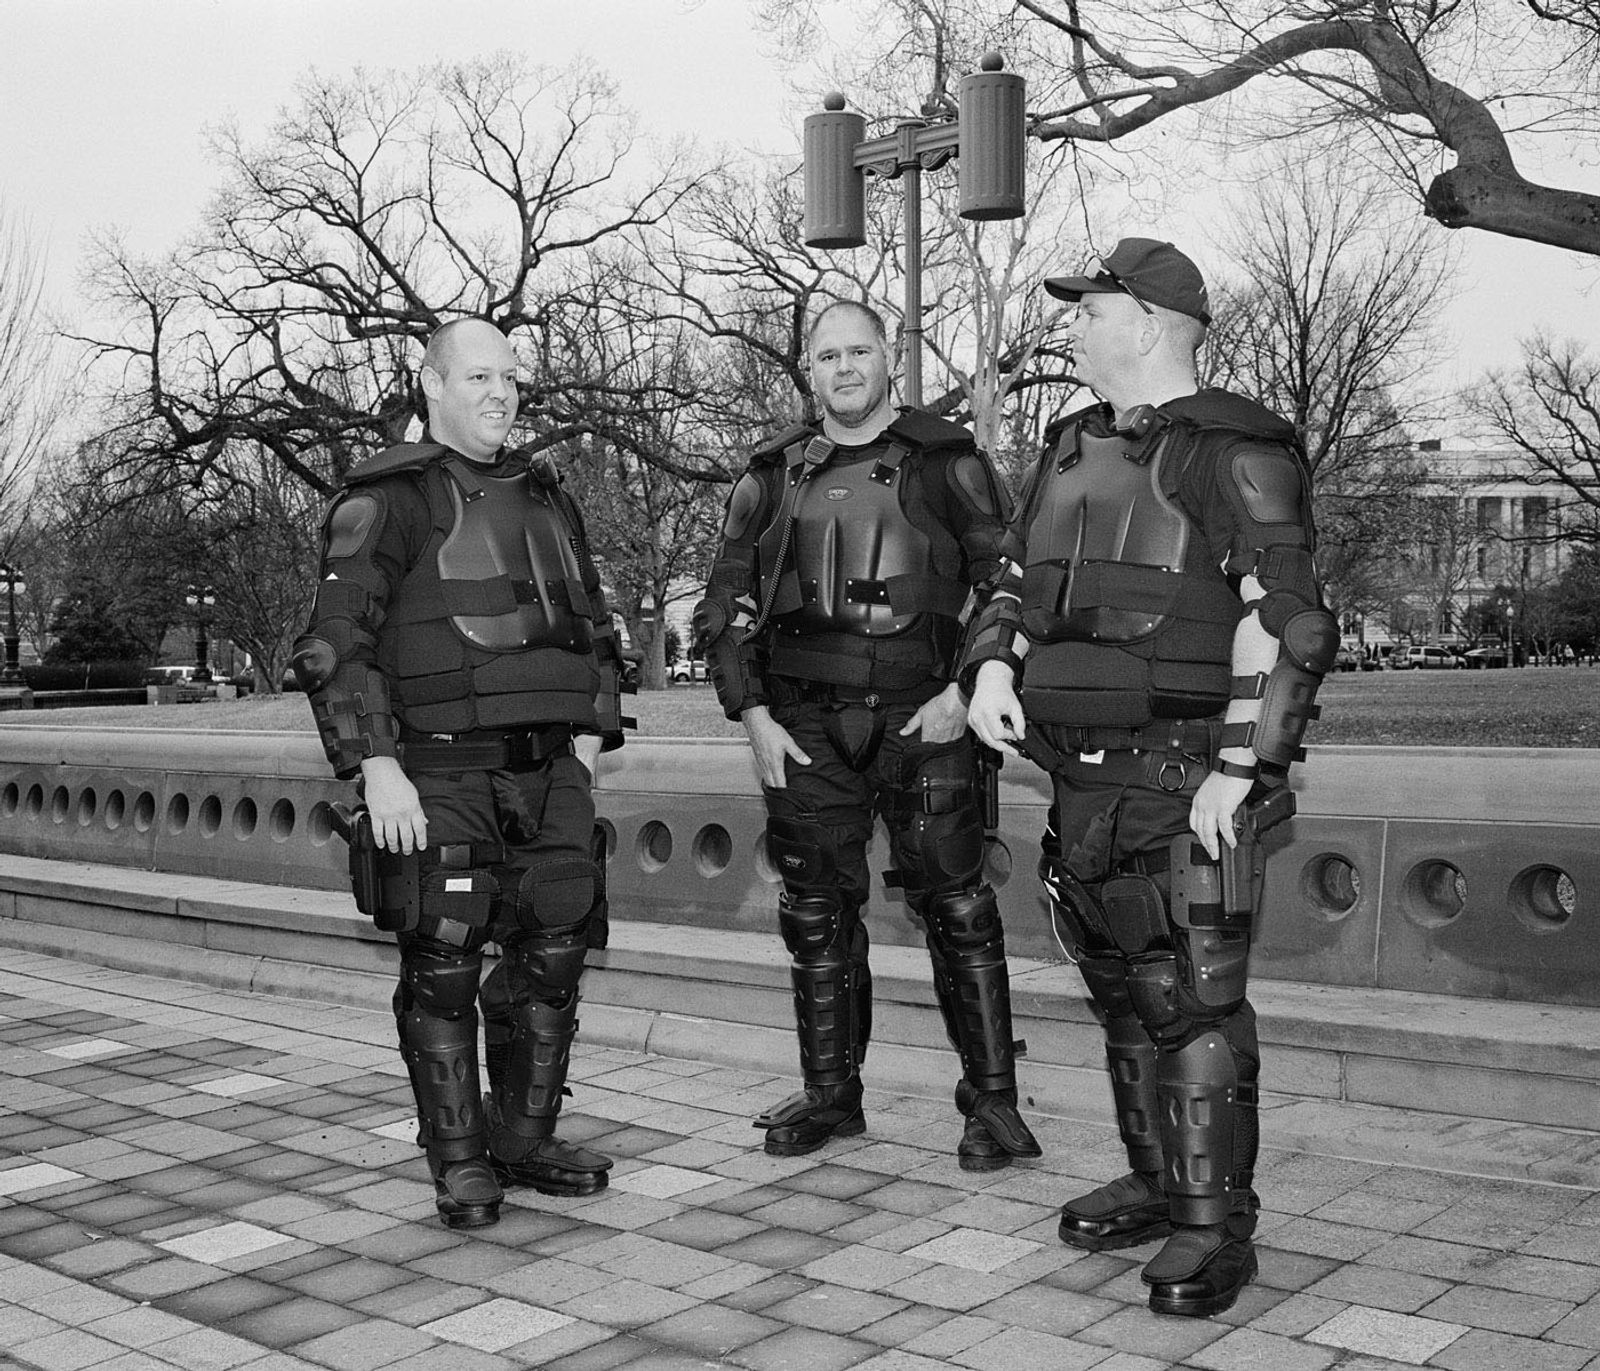 © Chase Barnes - Riot police at the women's march.